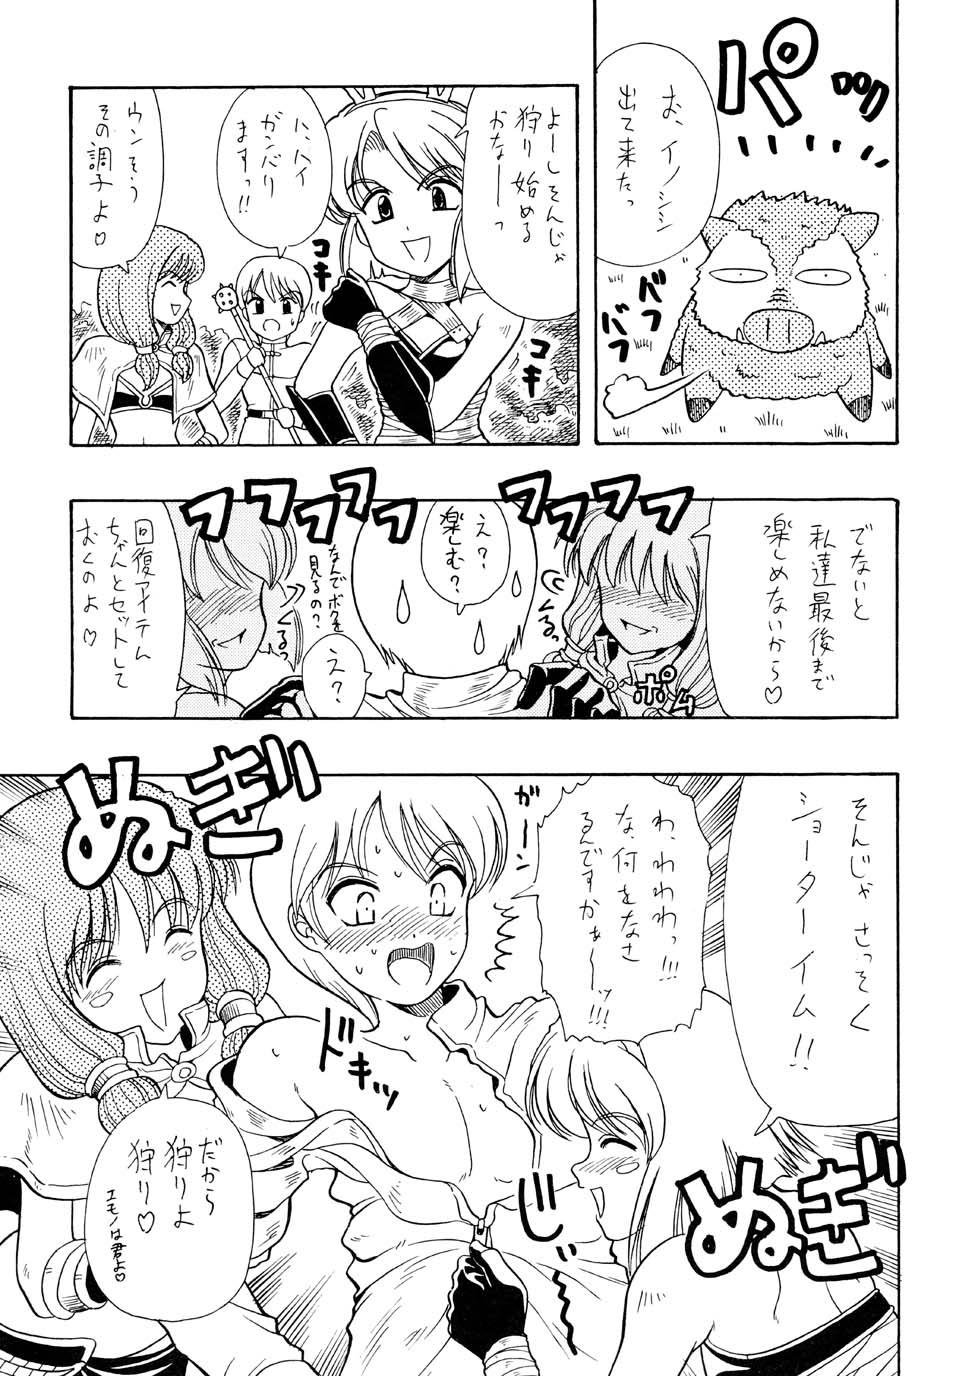 Defloration Acotan no Yabou / Acolyte's Greed - Ragnarok online Gay Blondhair - Page 11